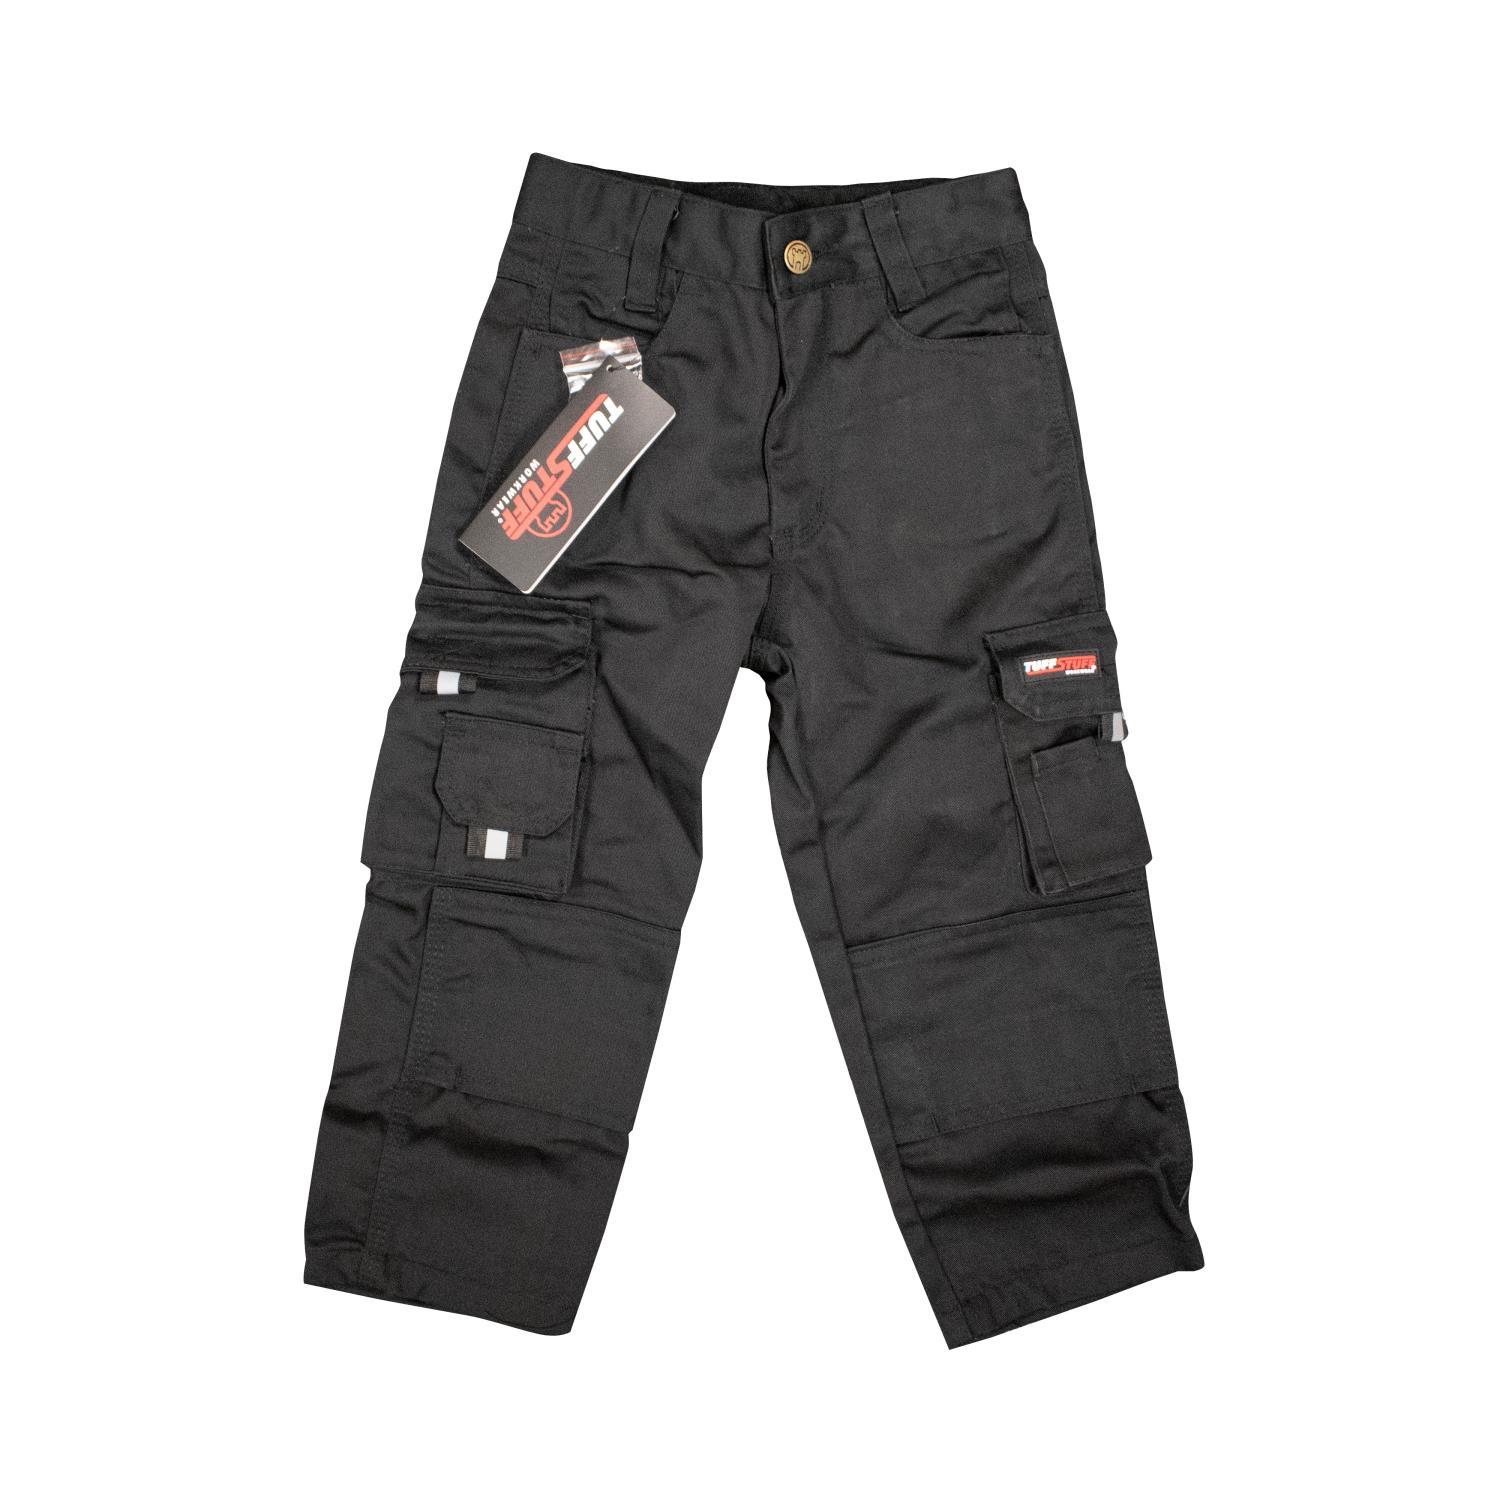 Brixton Builders Carpenter Pant - Washed Black – Working Class